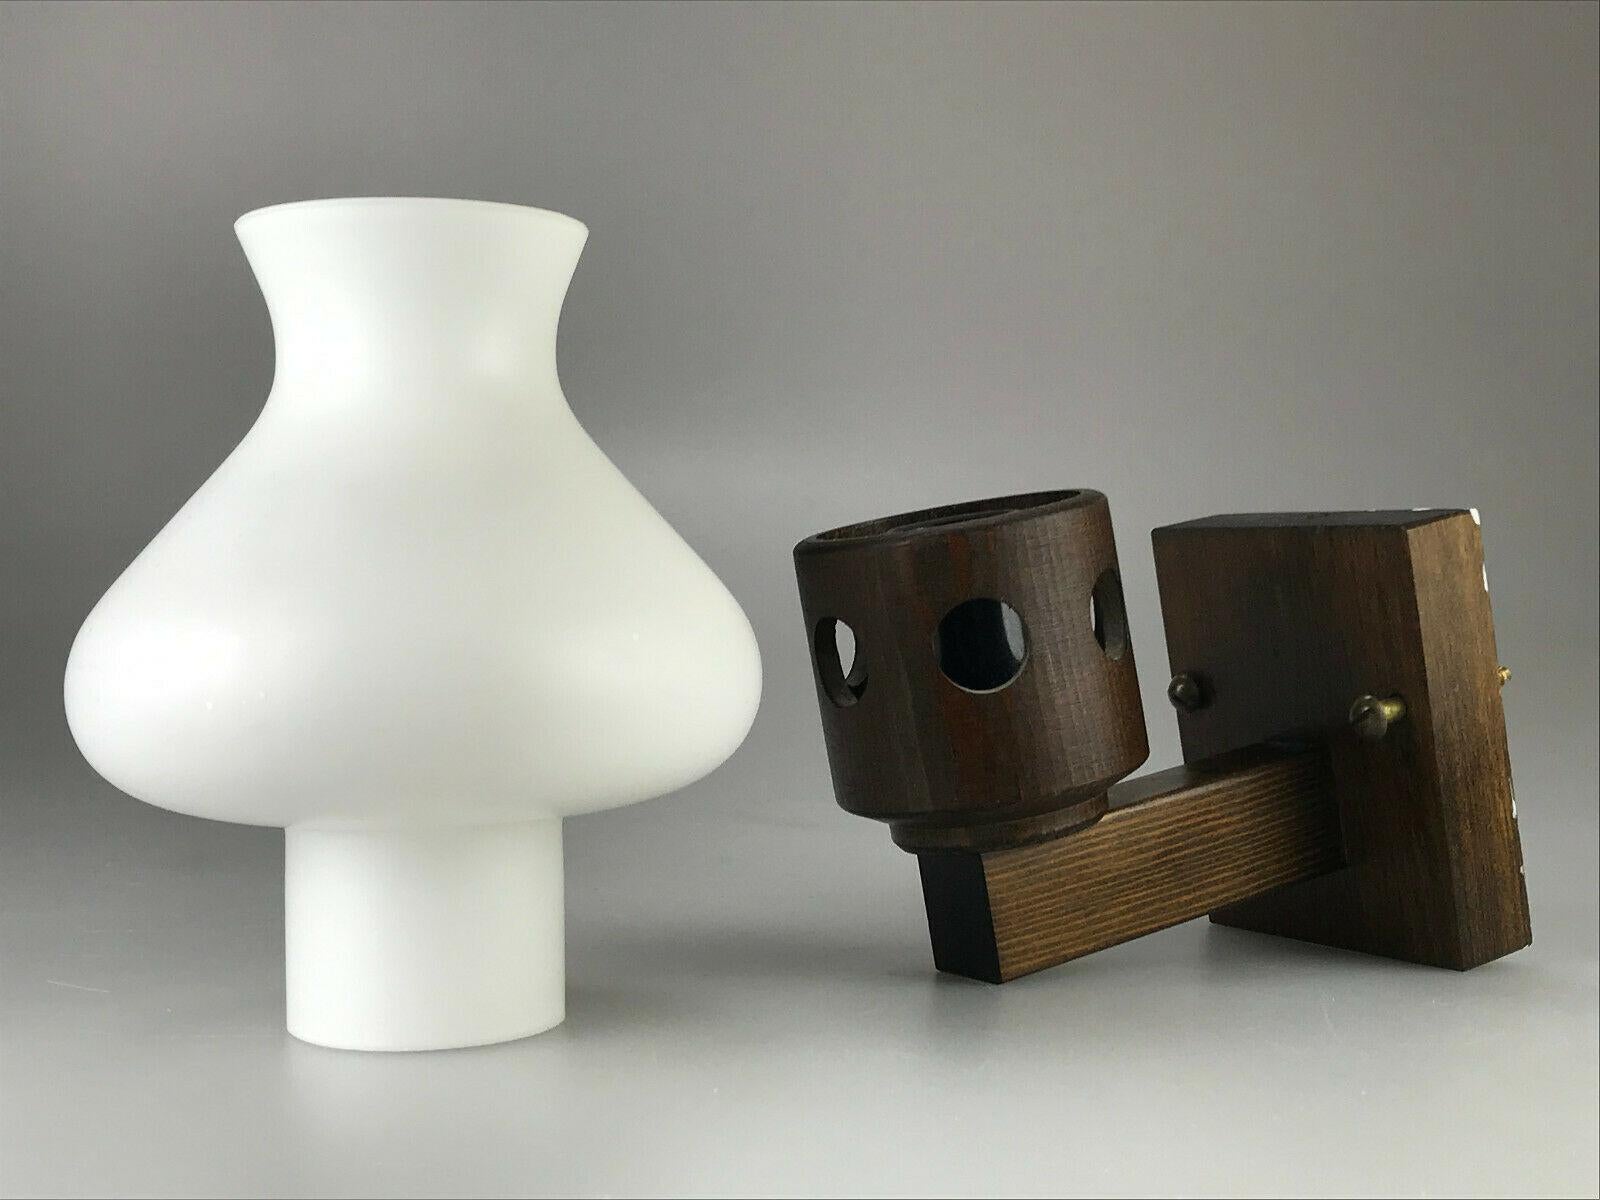 Late 20th Century 60s 70s Wall Lamp Vitrika Lamp Light Wall Sconce Space Age Design